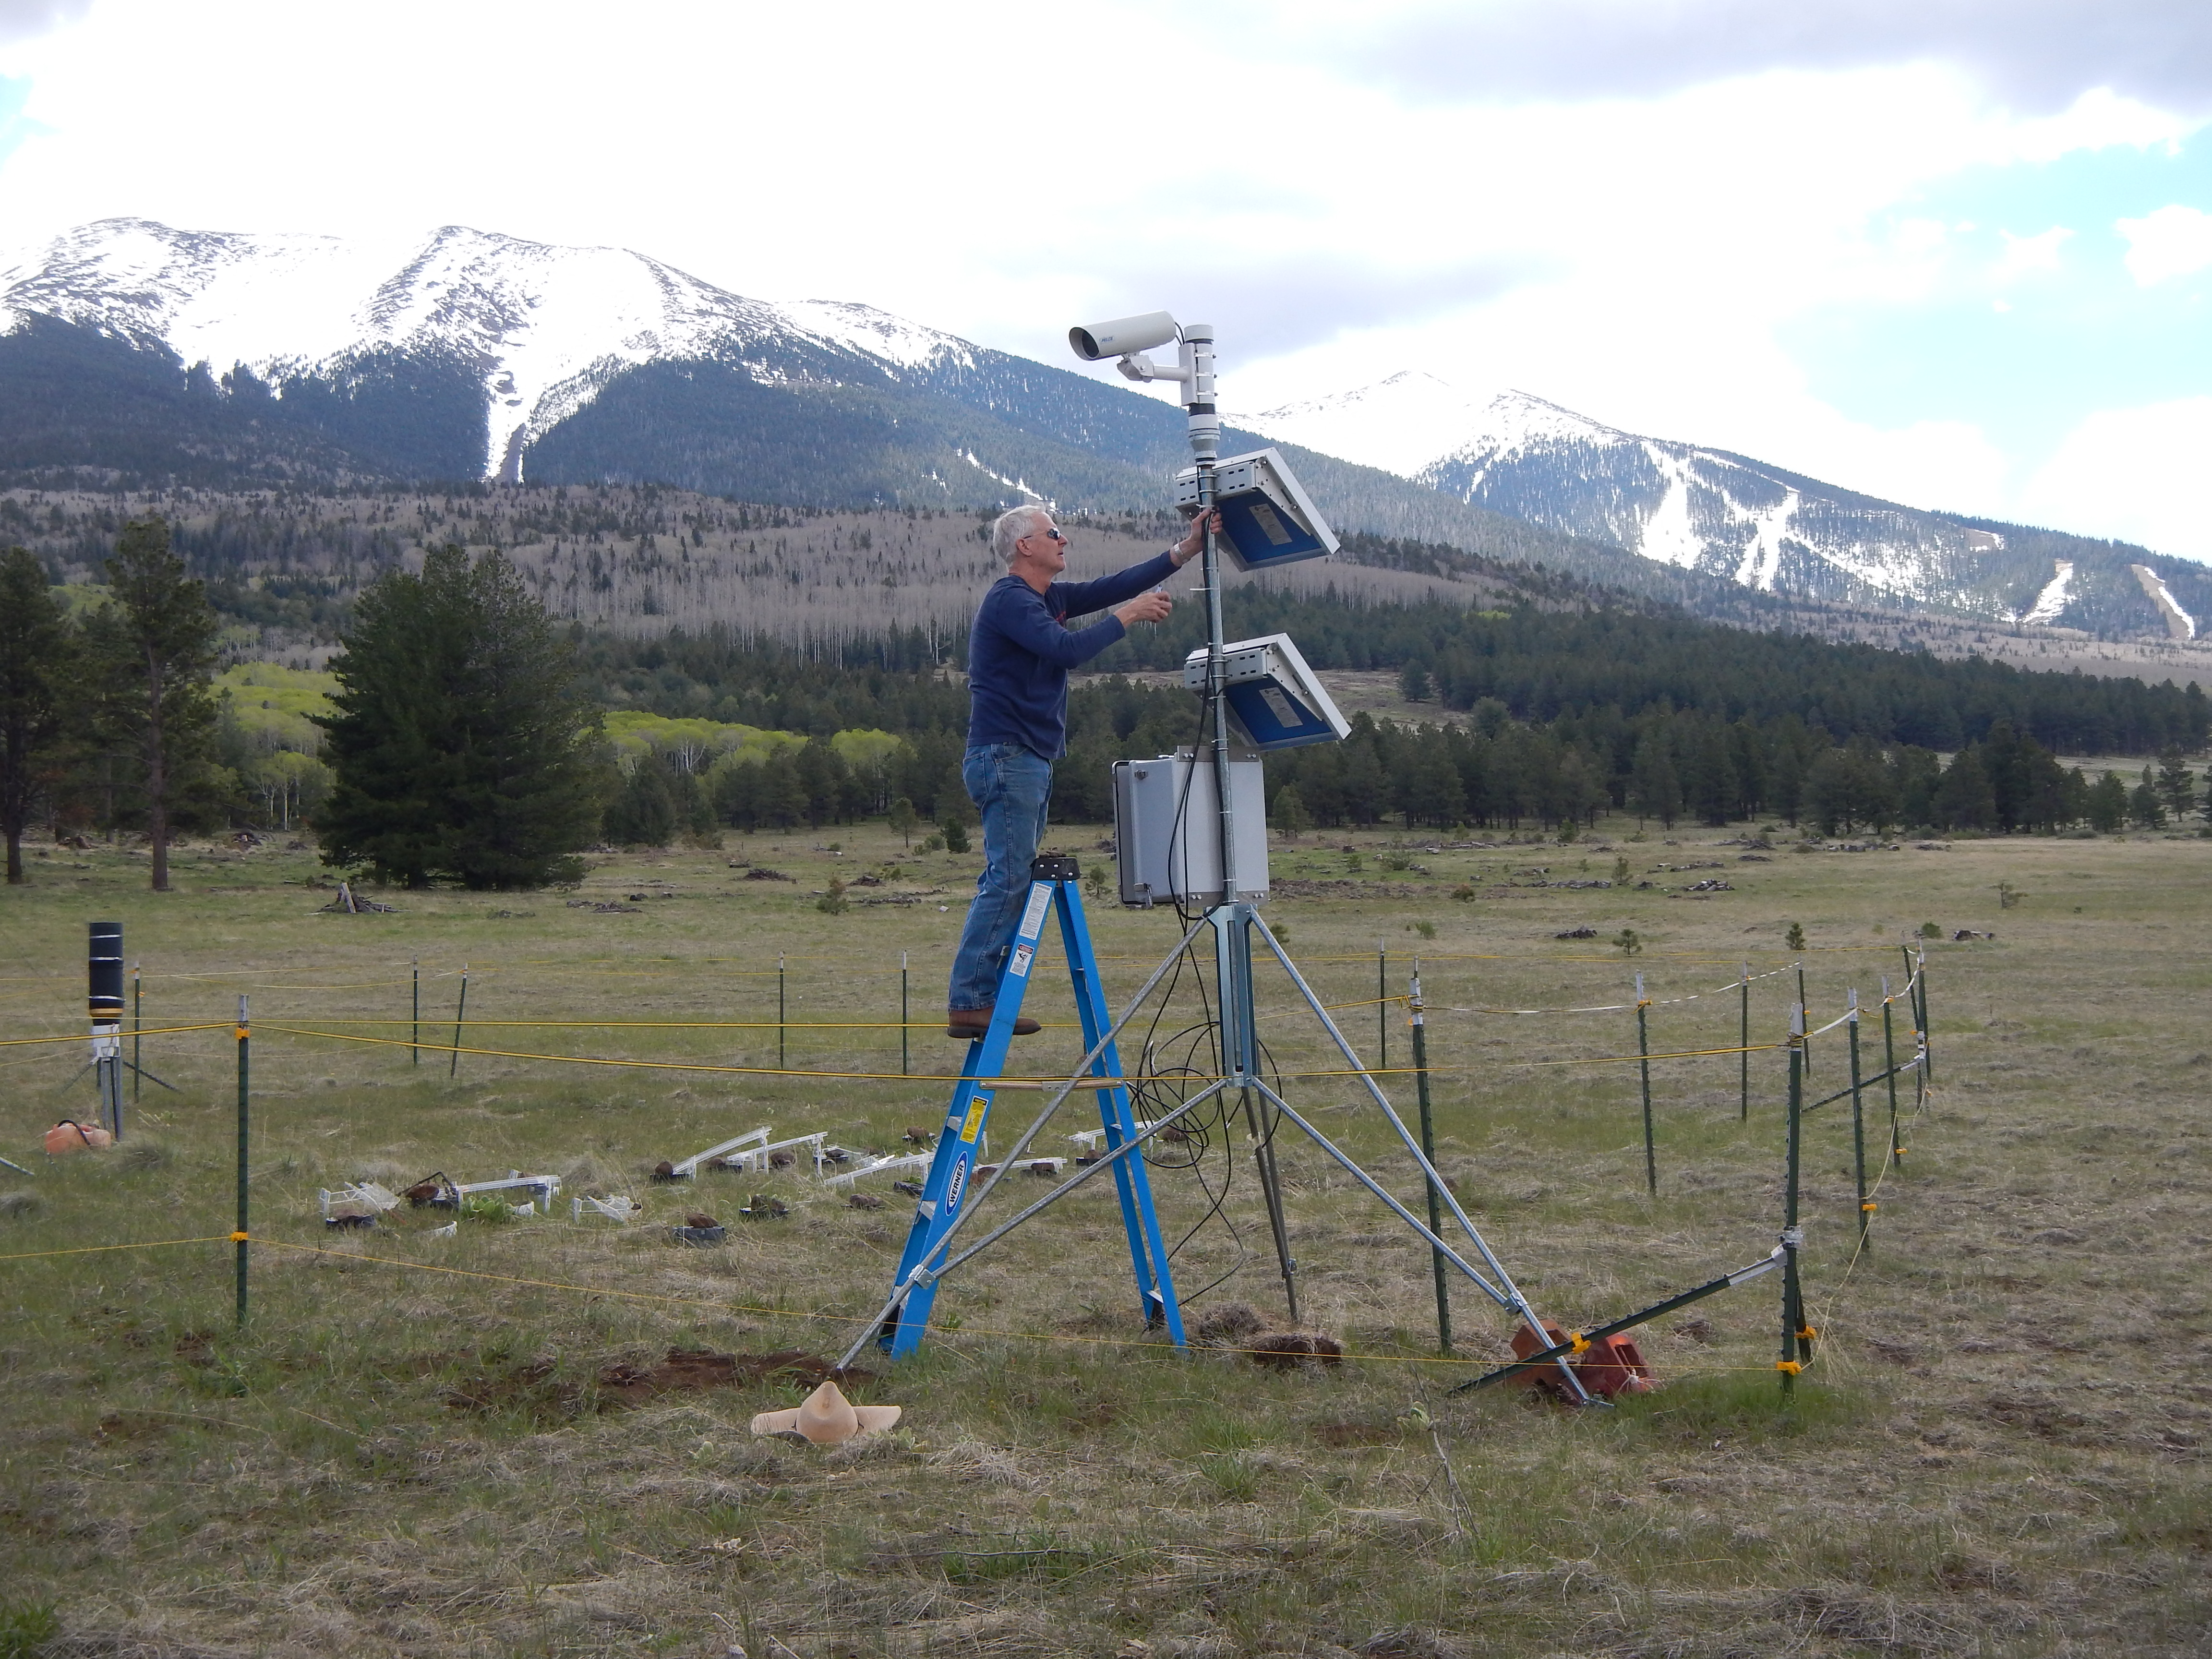 A 4-band camera system developed by the USGS Western Geographic Science Center was installed in 2015 to study vegetation growth dynamics at The Nature Conservancy's Hart Prairie Preserve near Flagstaff, Arizona (above), and several tropical and high-latitude forest sites. The 